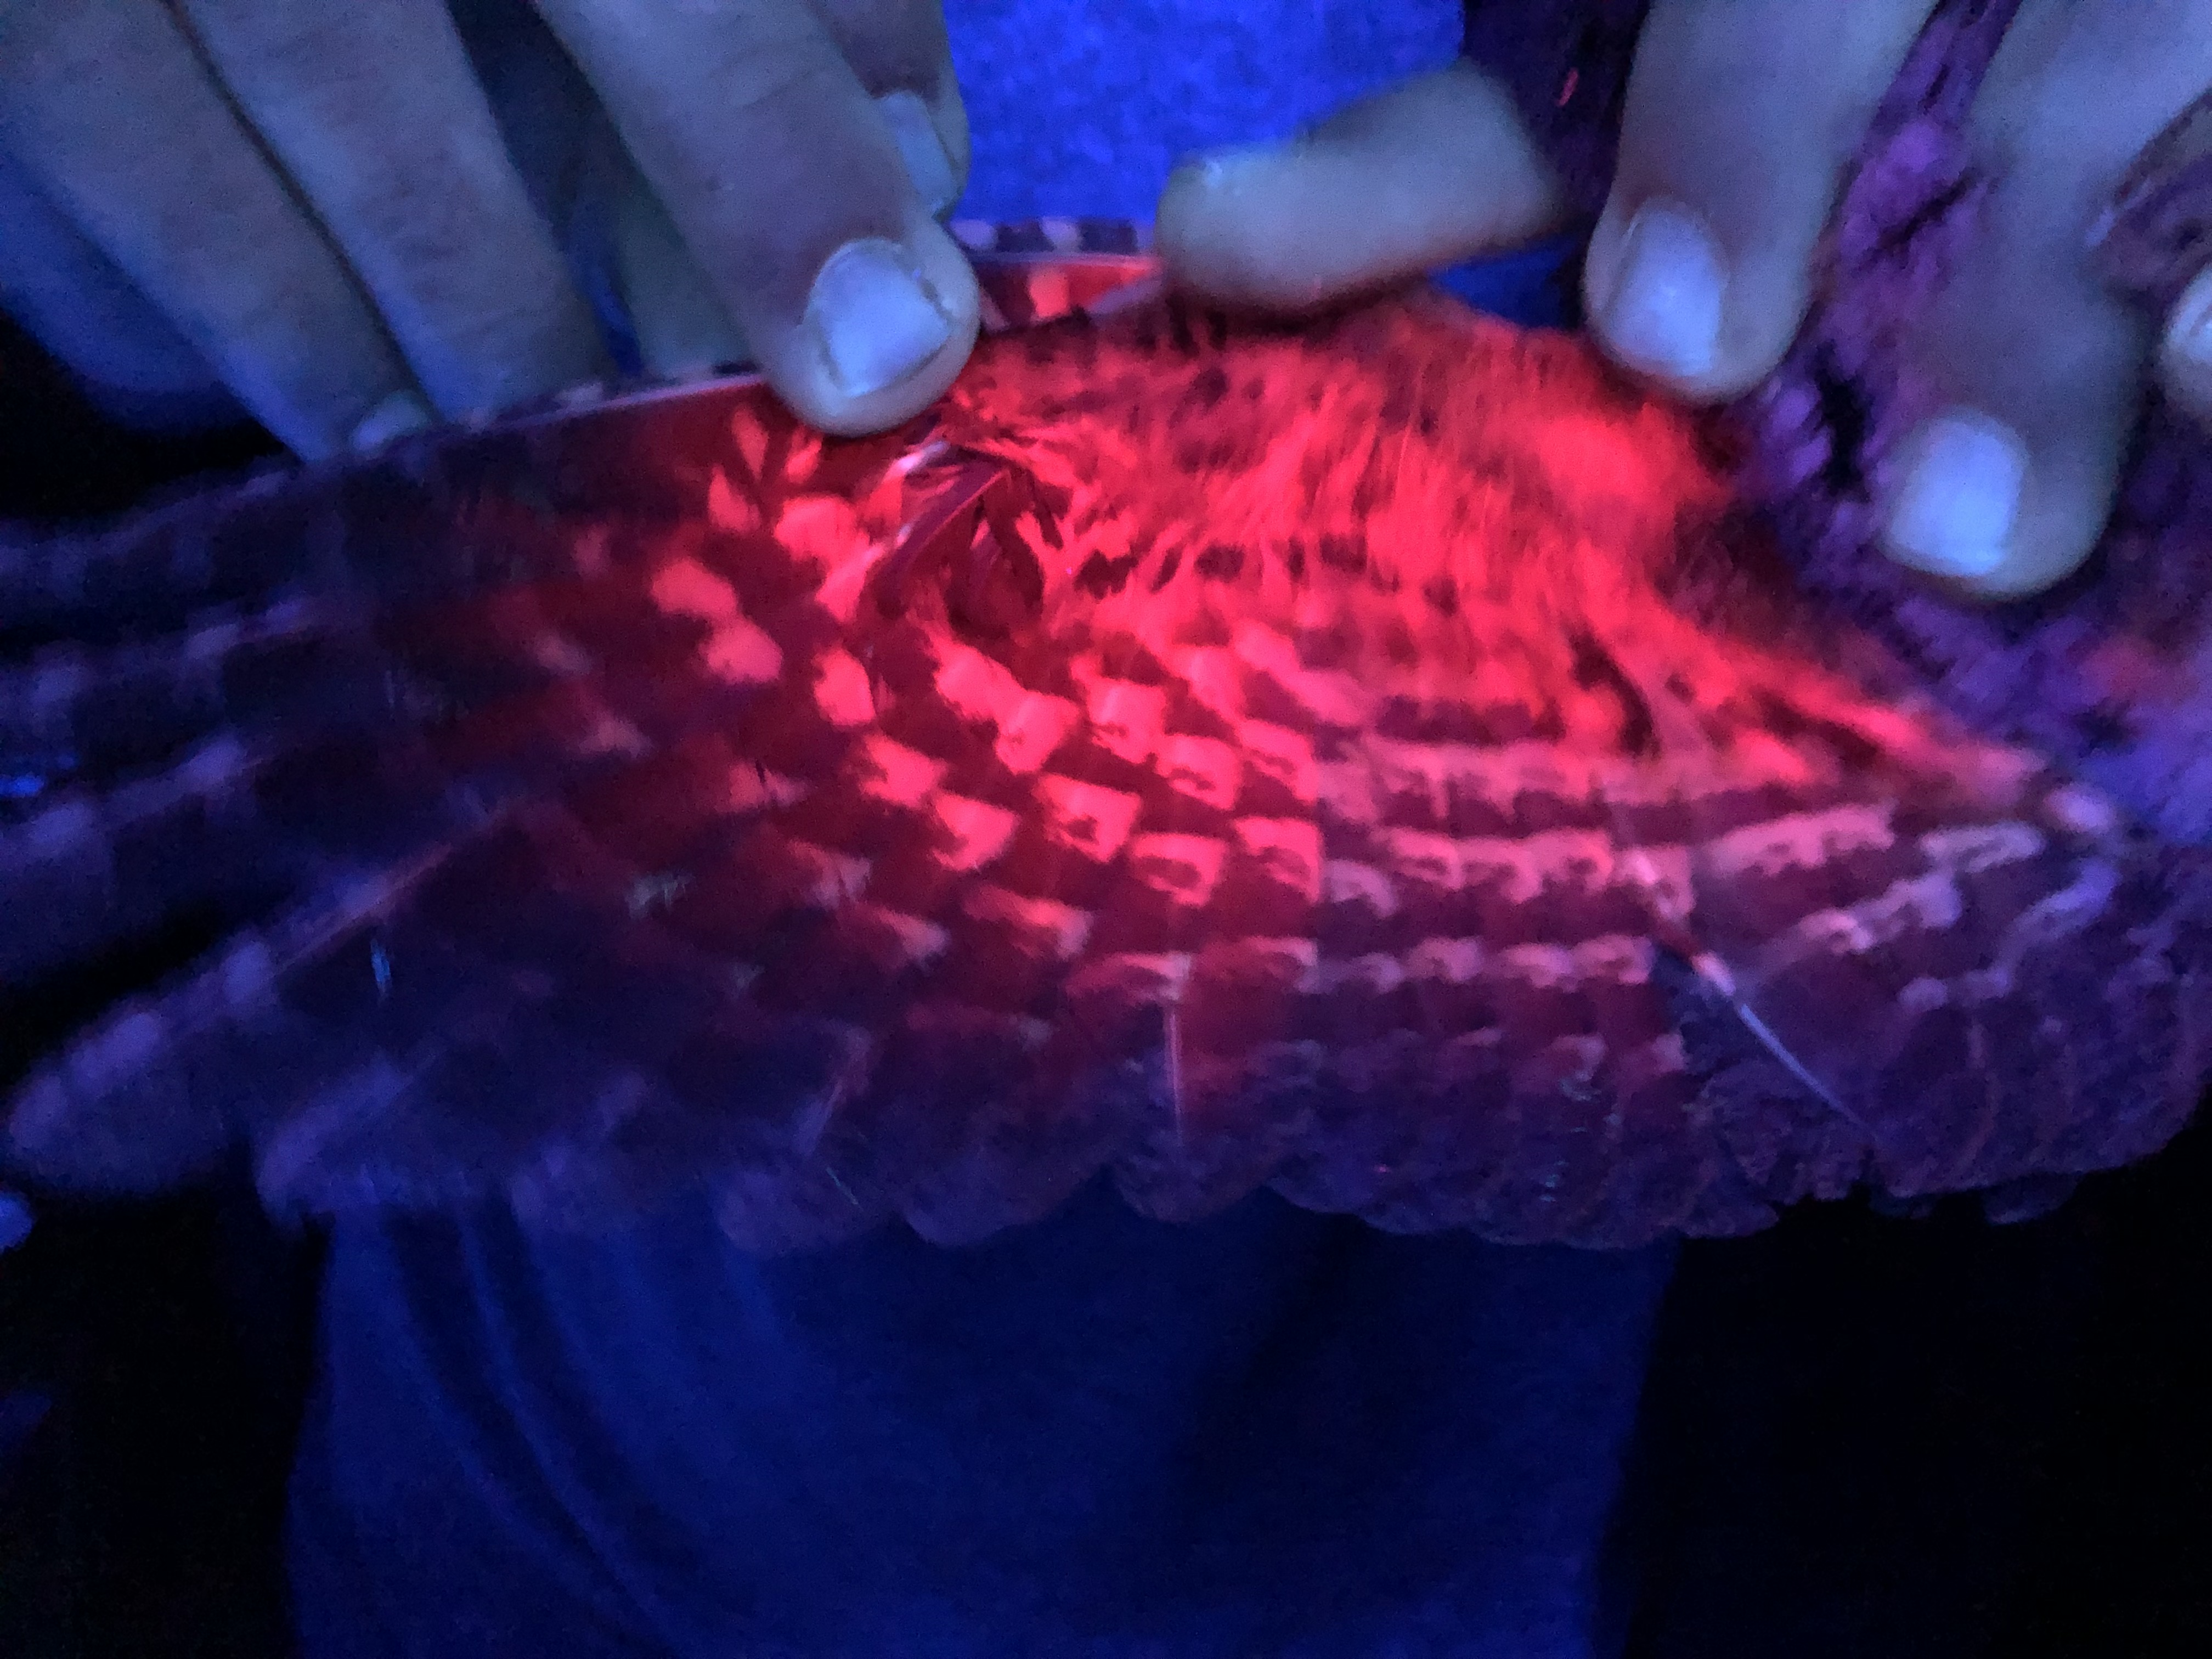 a spread wing of an owl glows bright pink under black light